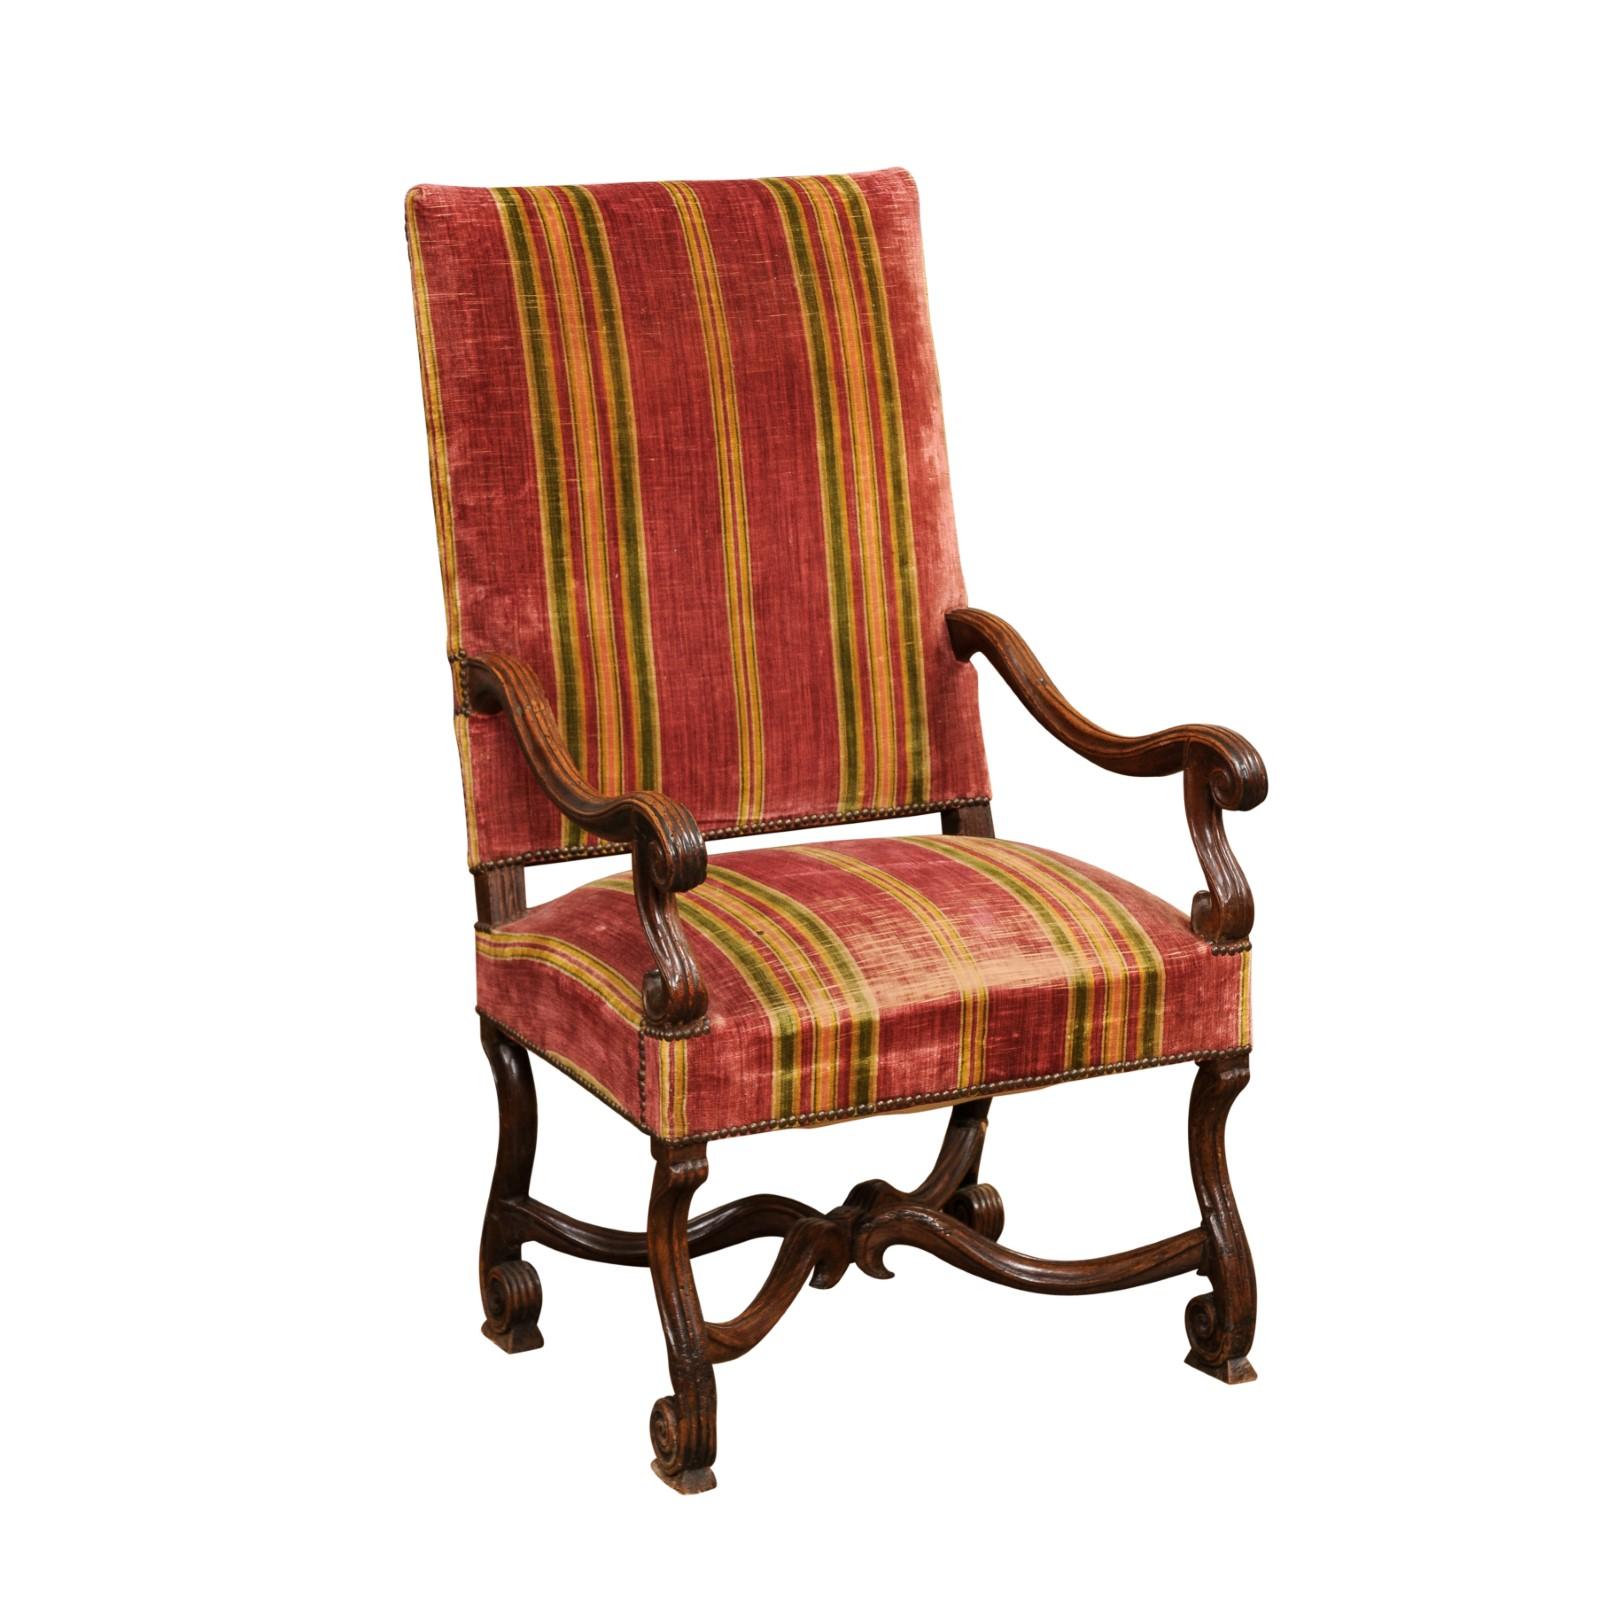 A French Louis XIV style carved walnut fauteuil from the late 18th century with large scrolling open arms, Flemish scroll legs, curving X-form stretcher and old upholstery. Created in France during the last decade of the 18th century, this armchair